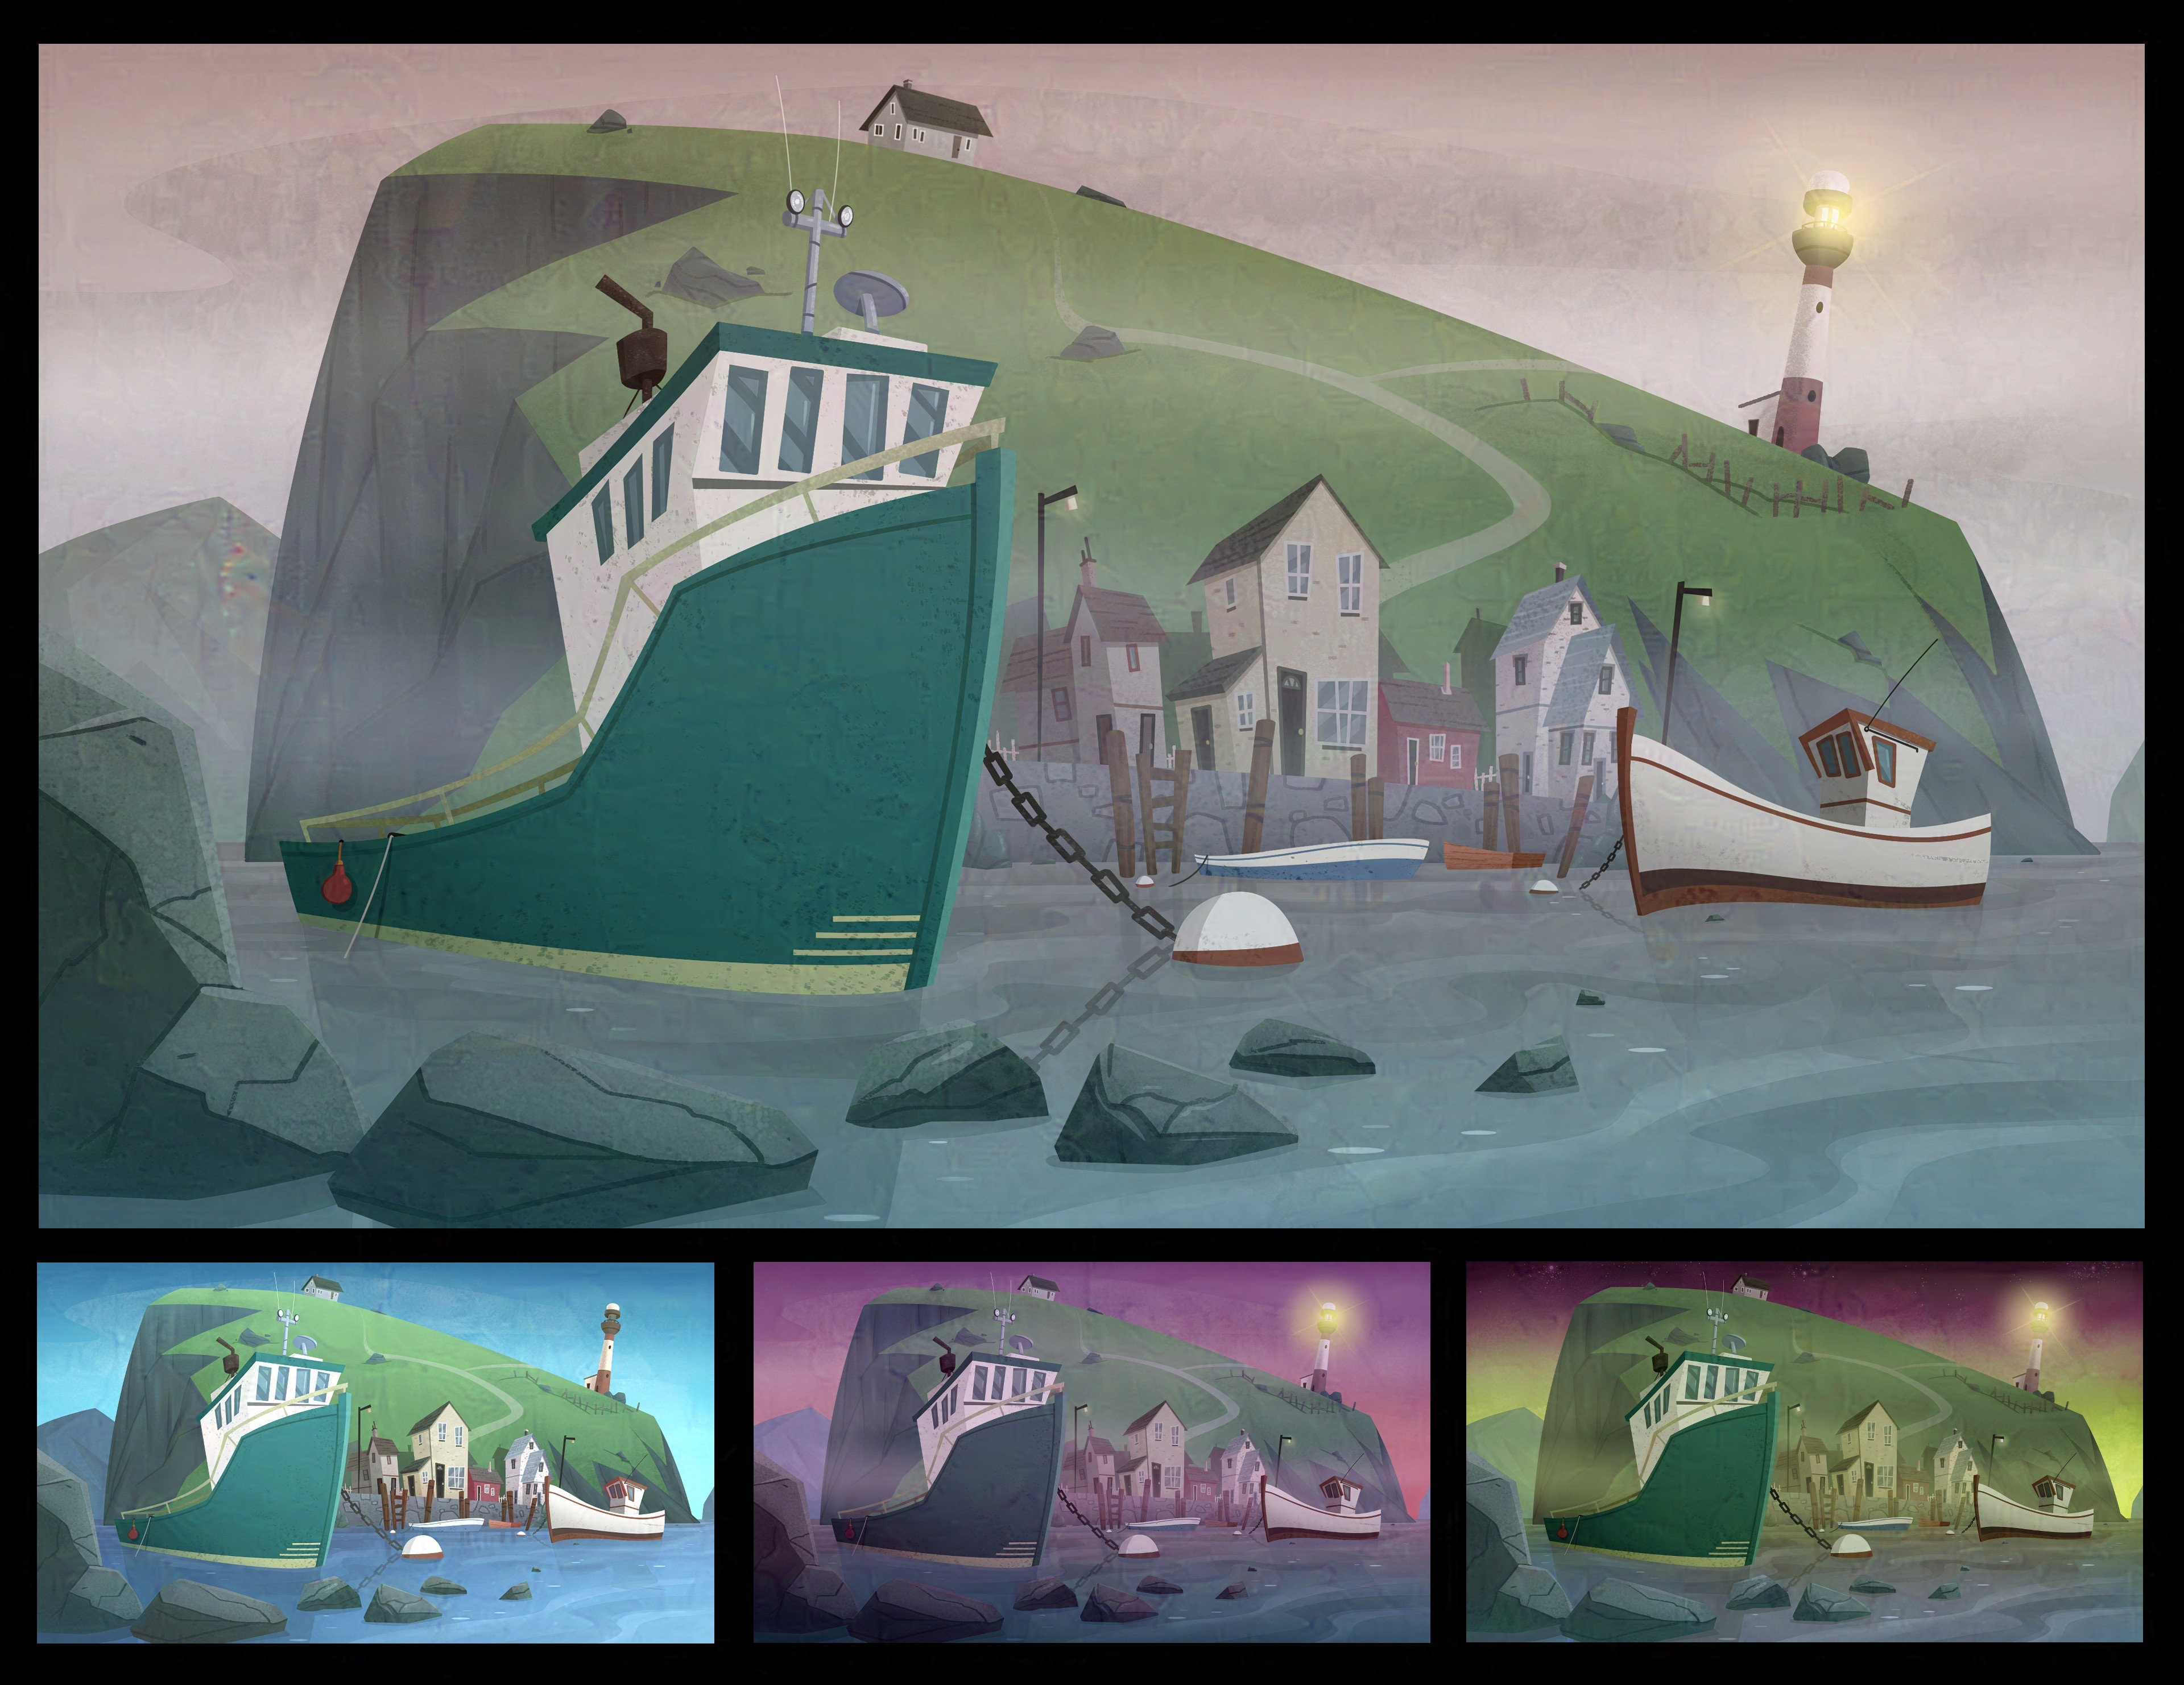 Foggy Fishing Village
(With color variants for daytime, sunset, and Aurora Borealis lighting)